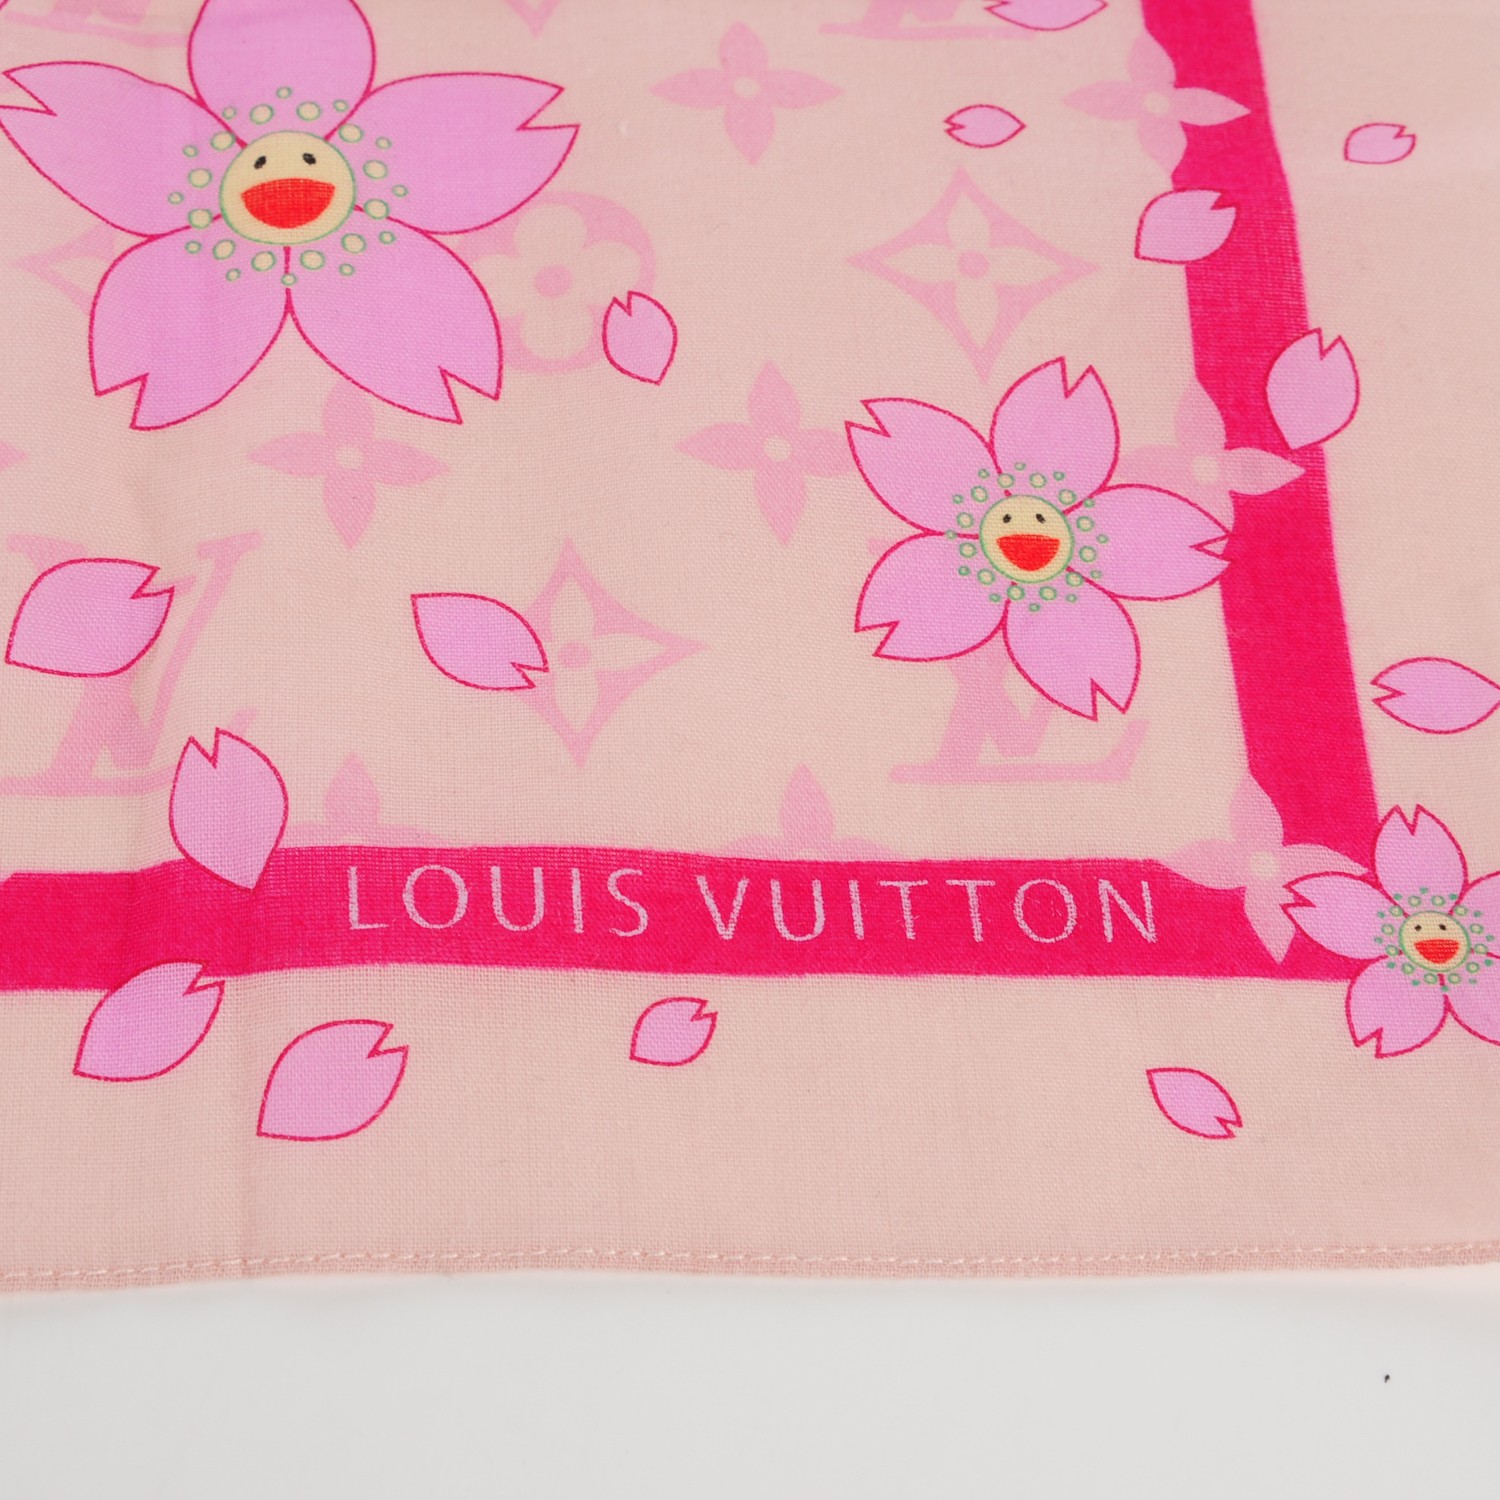 LOUIS VUITTON Cotton Cherry Blossom Square Scarf Pink 128228